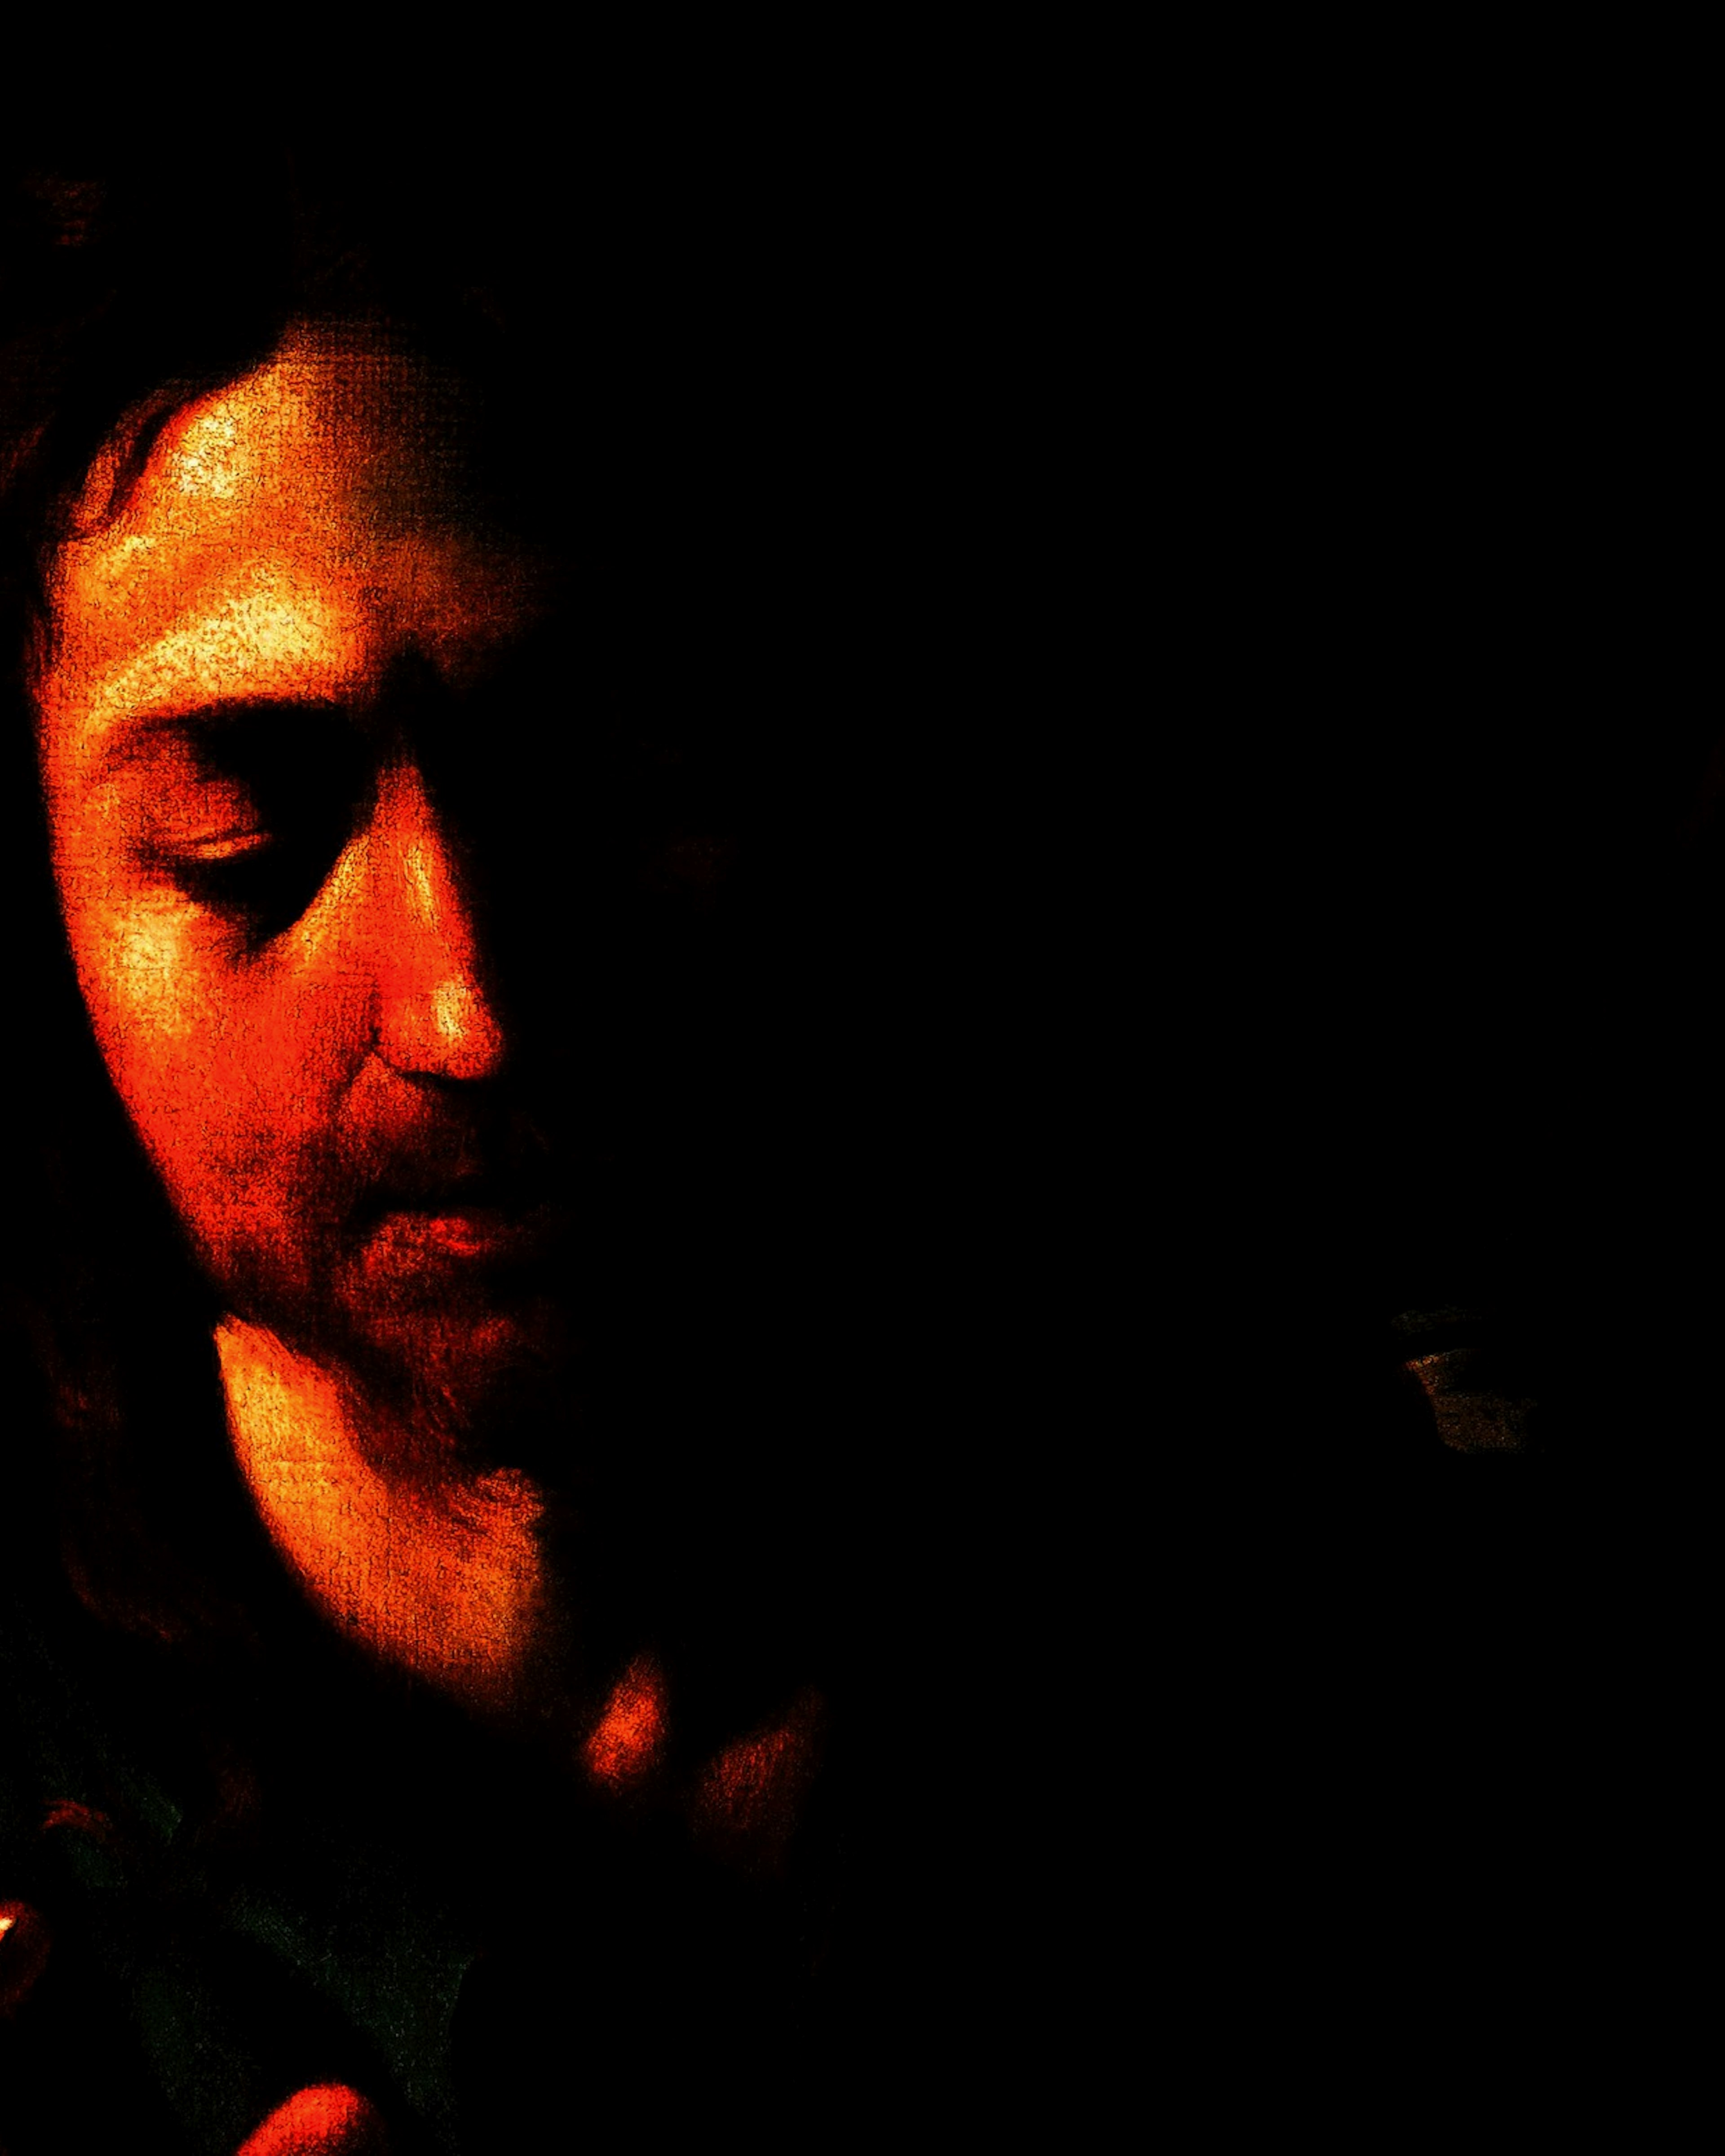 Milan, Pinacoteca Di Brera (Art Gallery, Paintings) Christ, detail from The Supper at Emmaus, 1606, by Michelangelo Merisi, known as Caravaggio Caravaggio (1571-1610), oil on canvas, 141x175 cm. (Photo by DeAgostini/Getty Images)